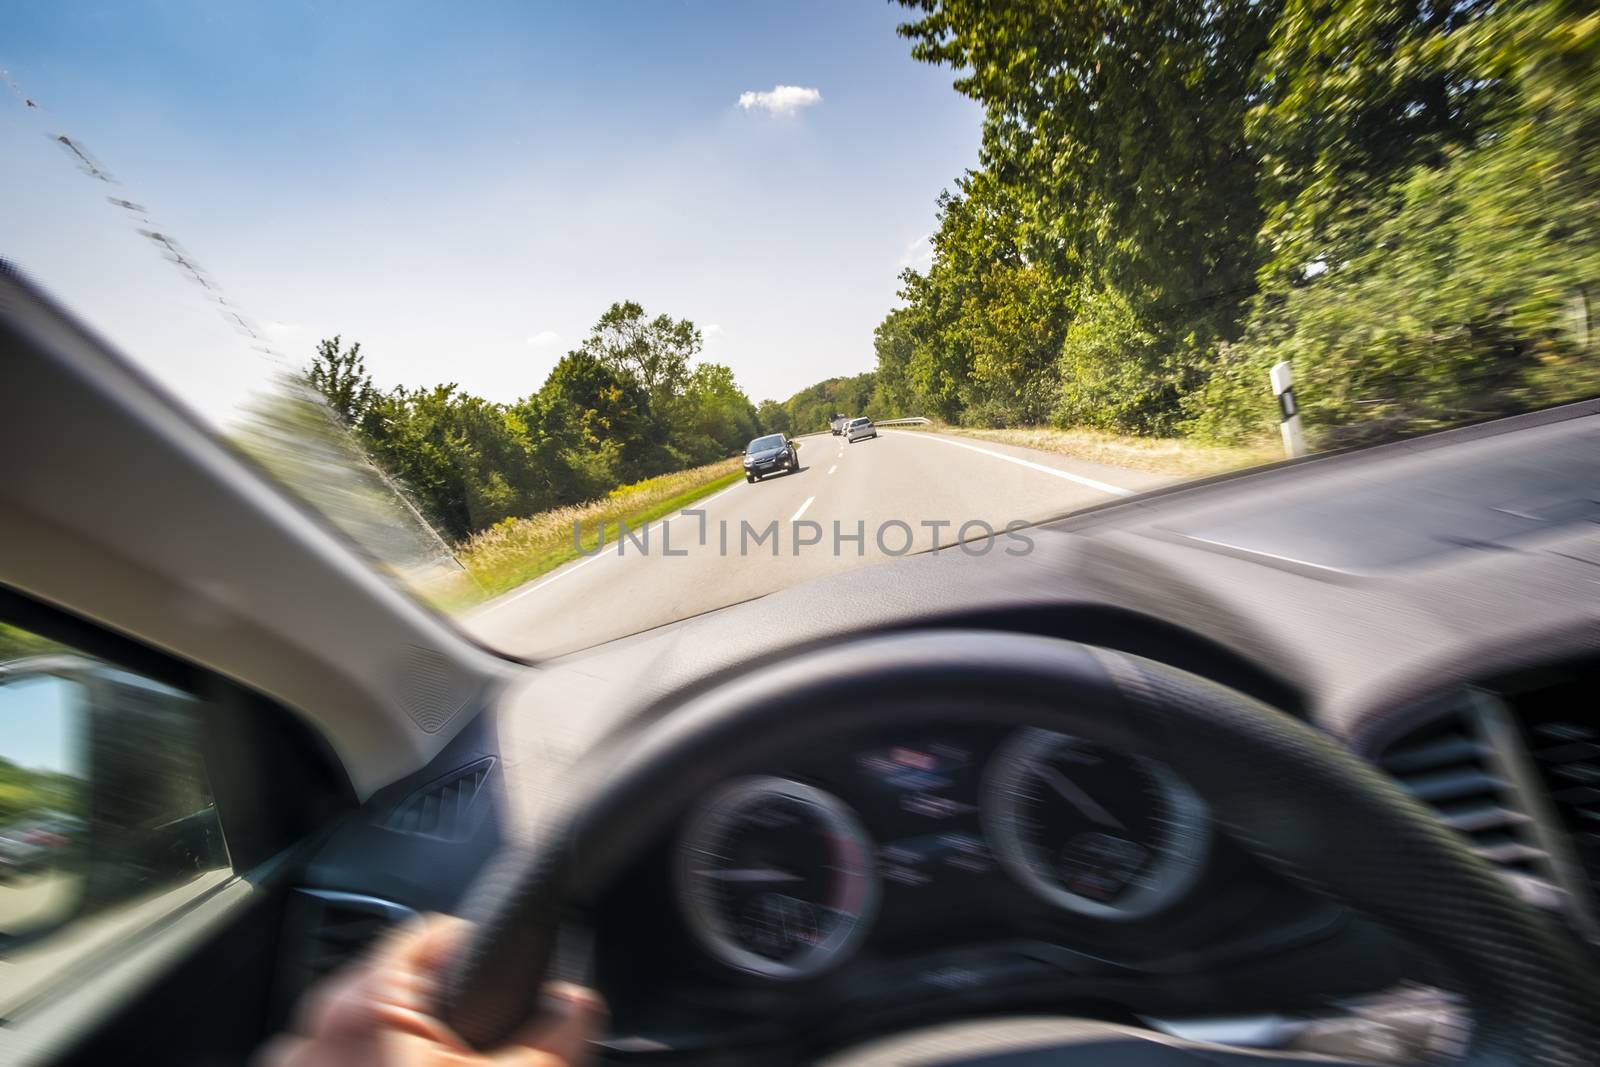 View from a fast moving car with high fuel consumption